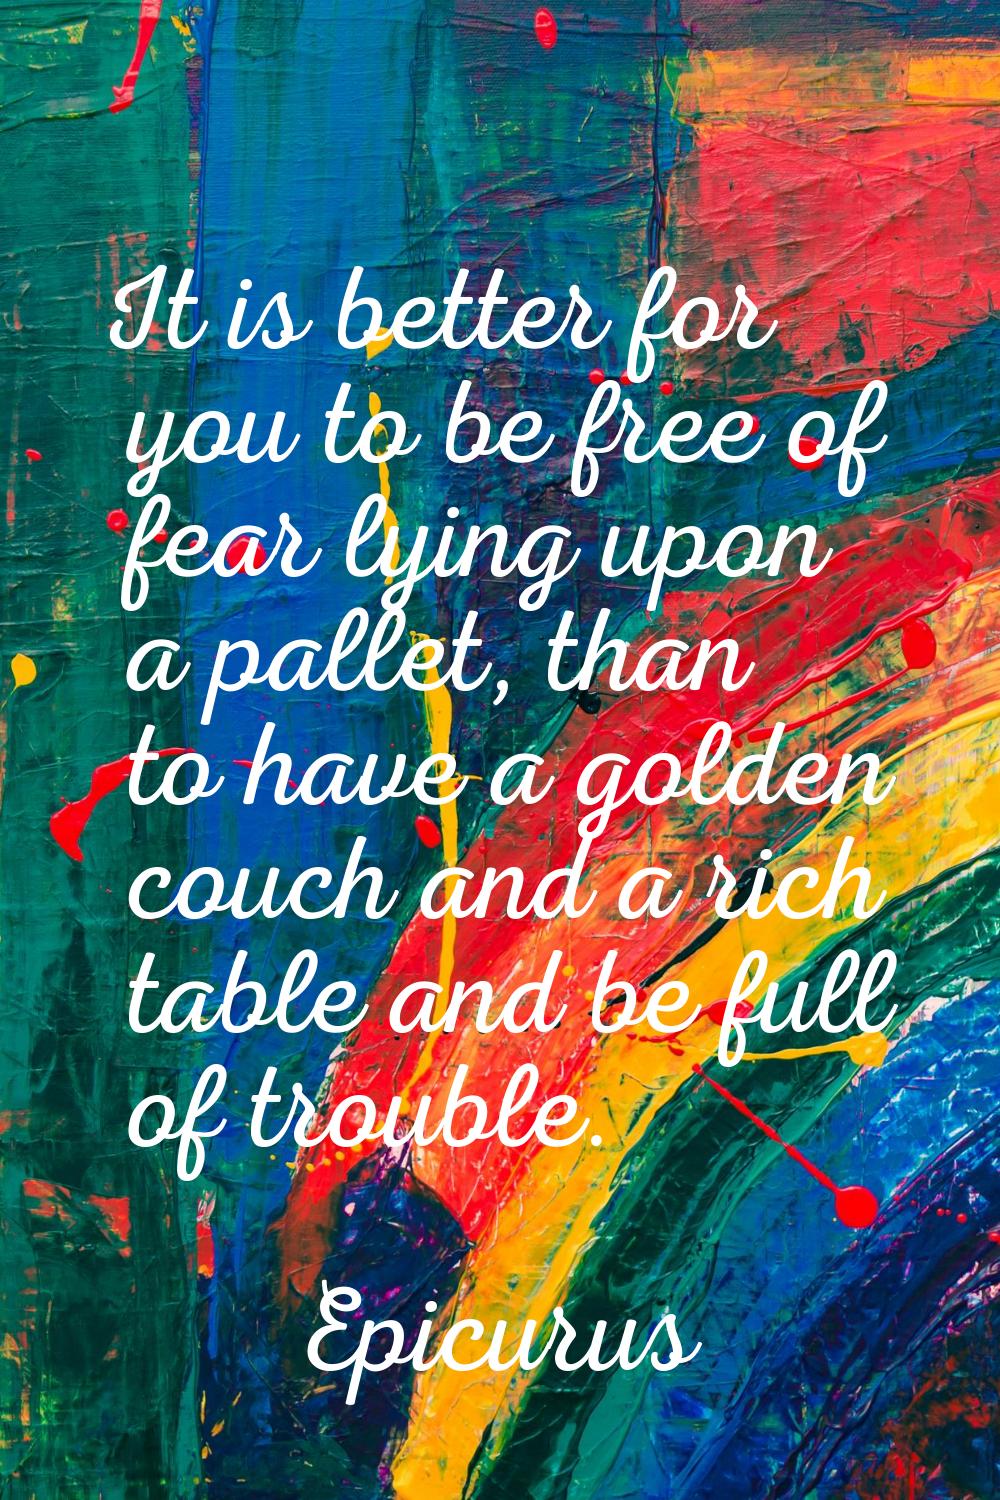 It is better for you to be free of fear lying upon a pallet, than to have a golden couch and a rich